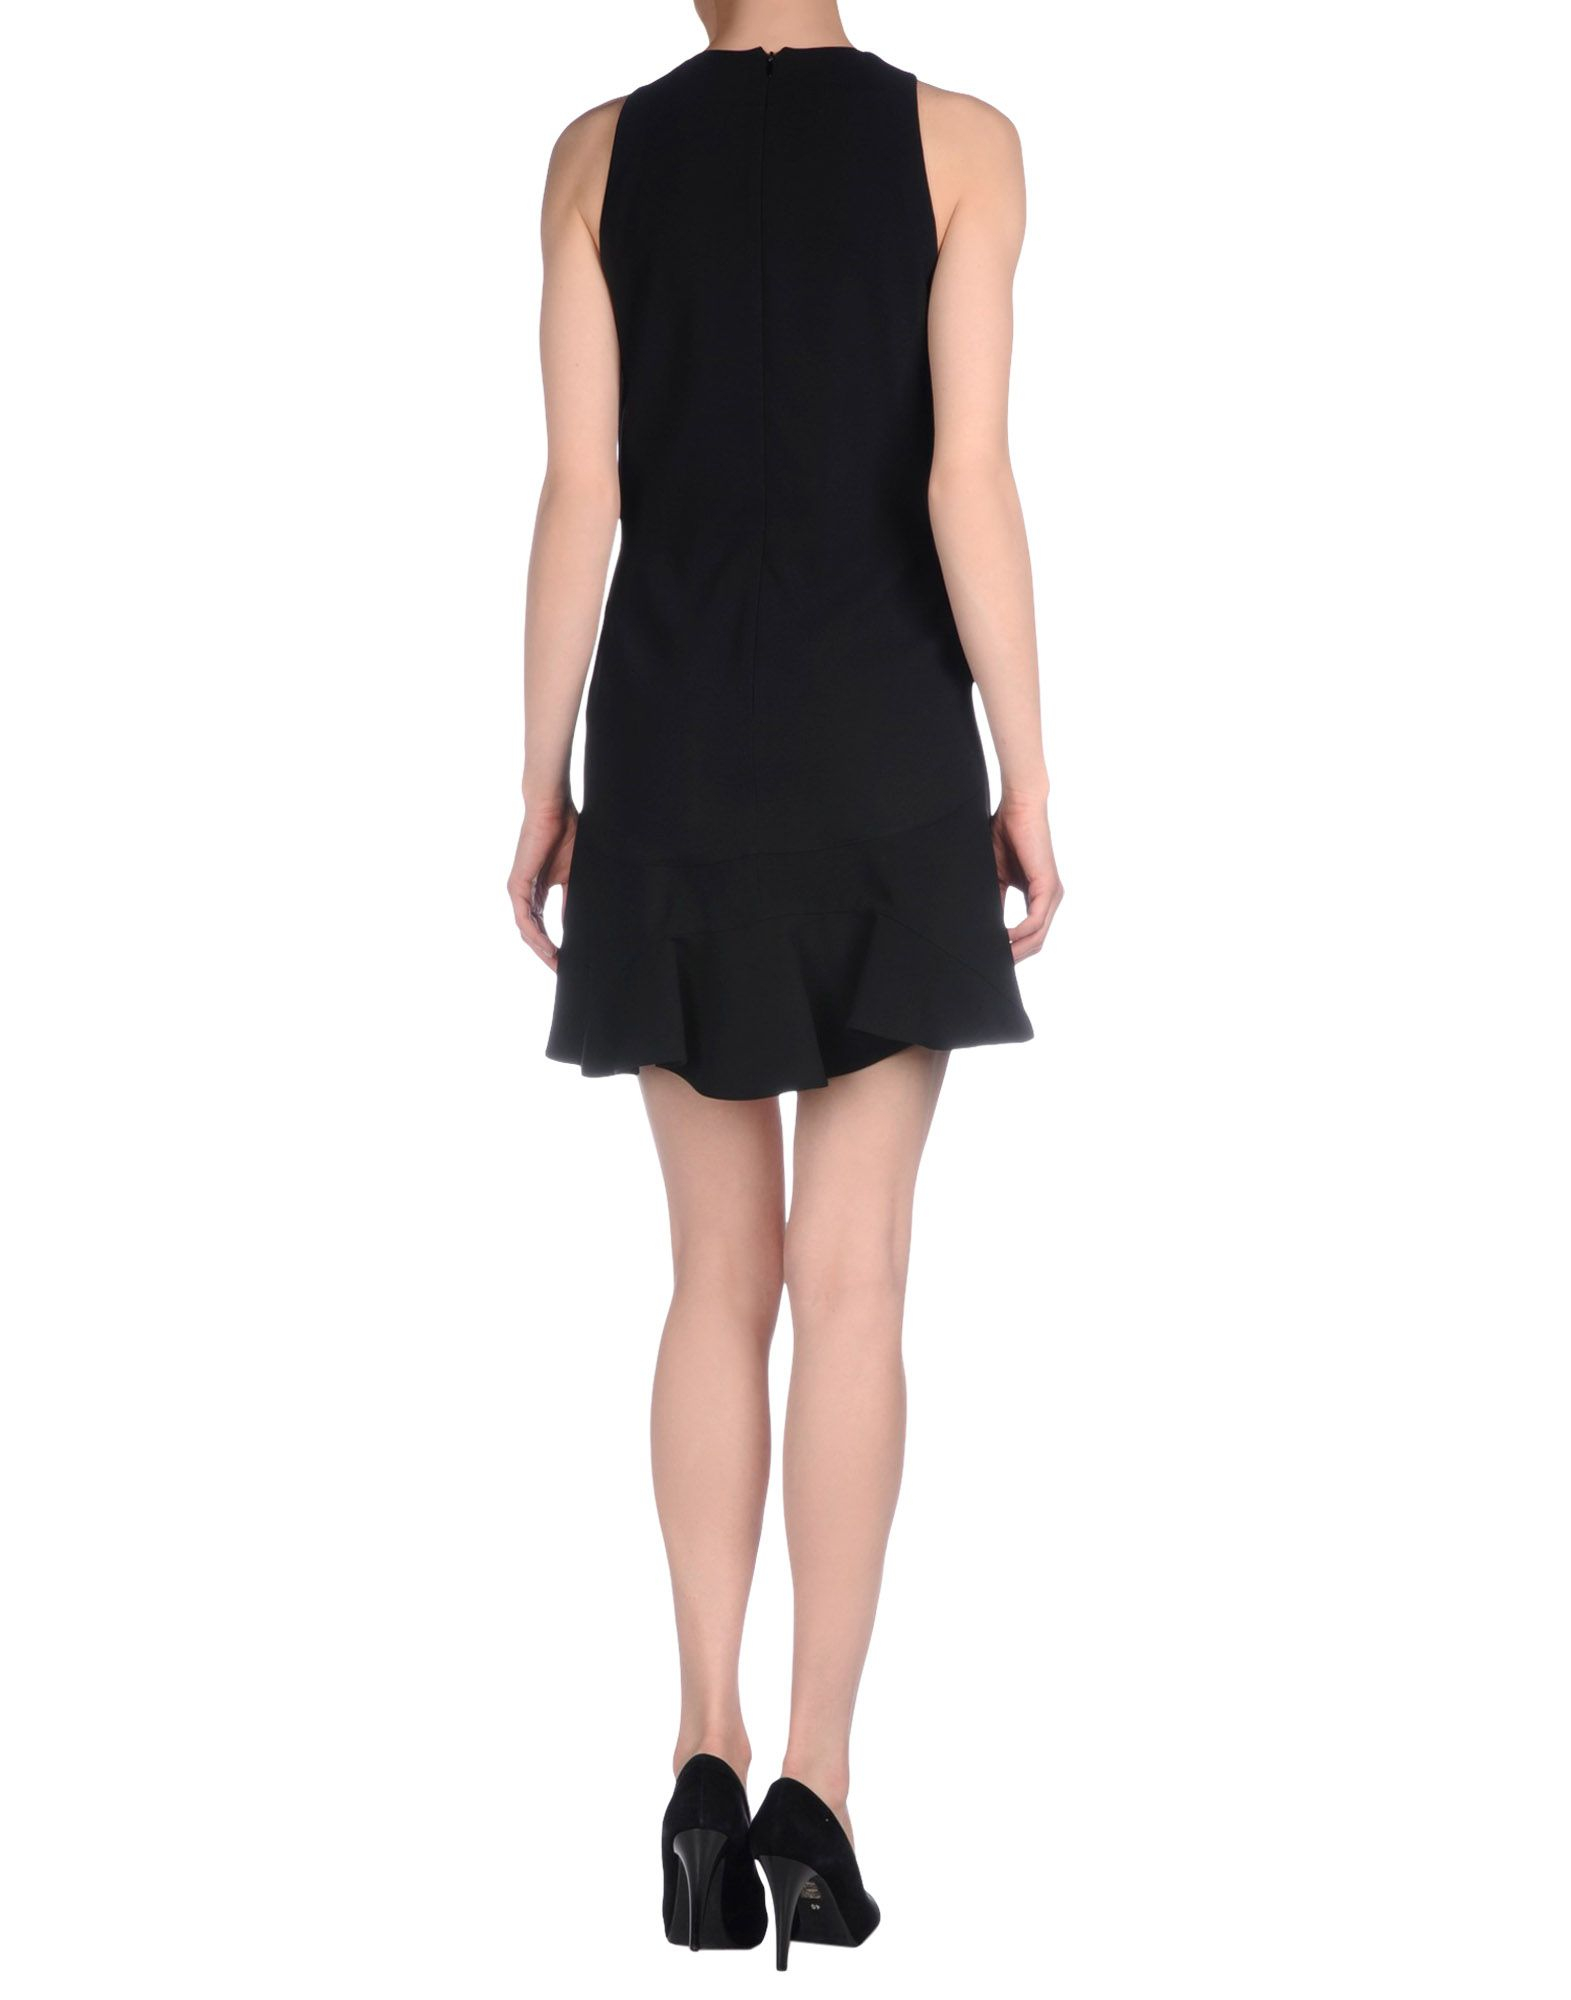 Lyst - Givenchy Short Dress in Black